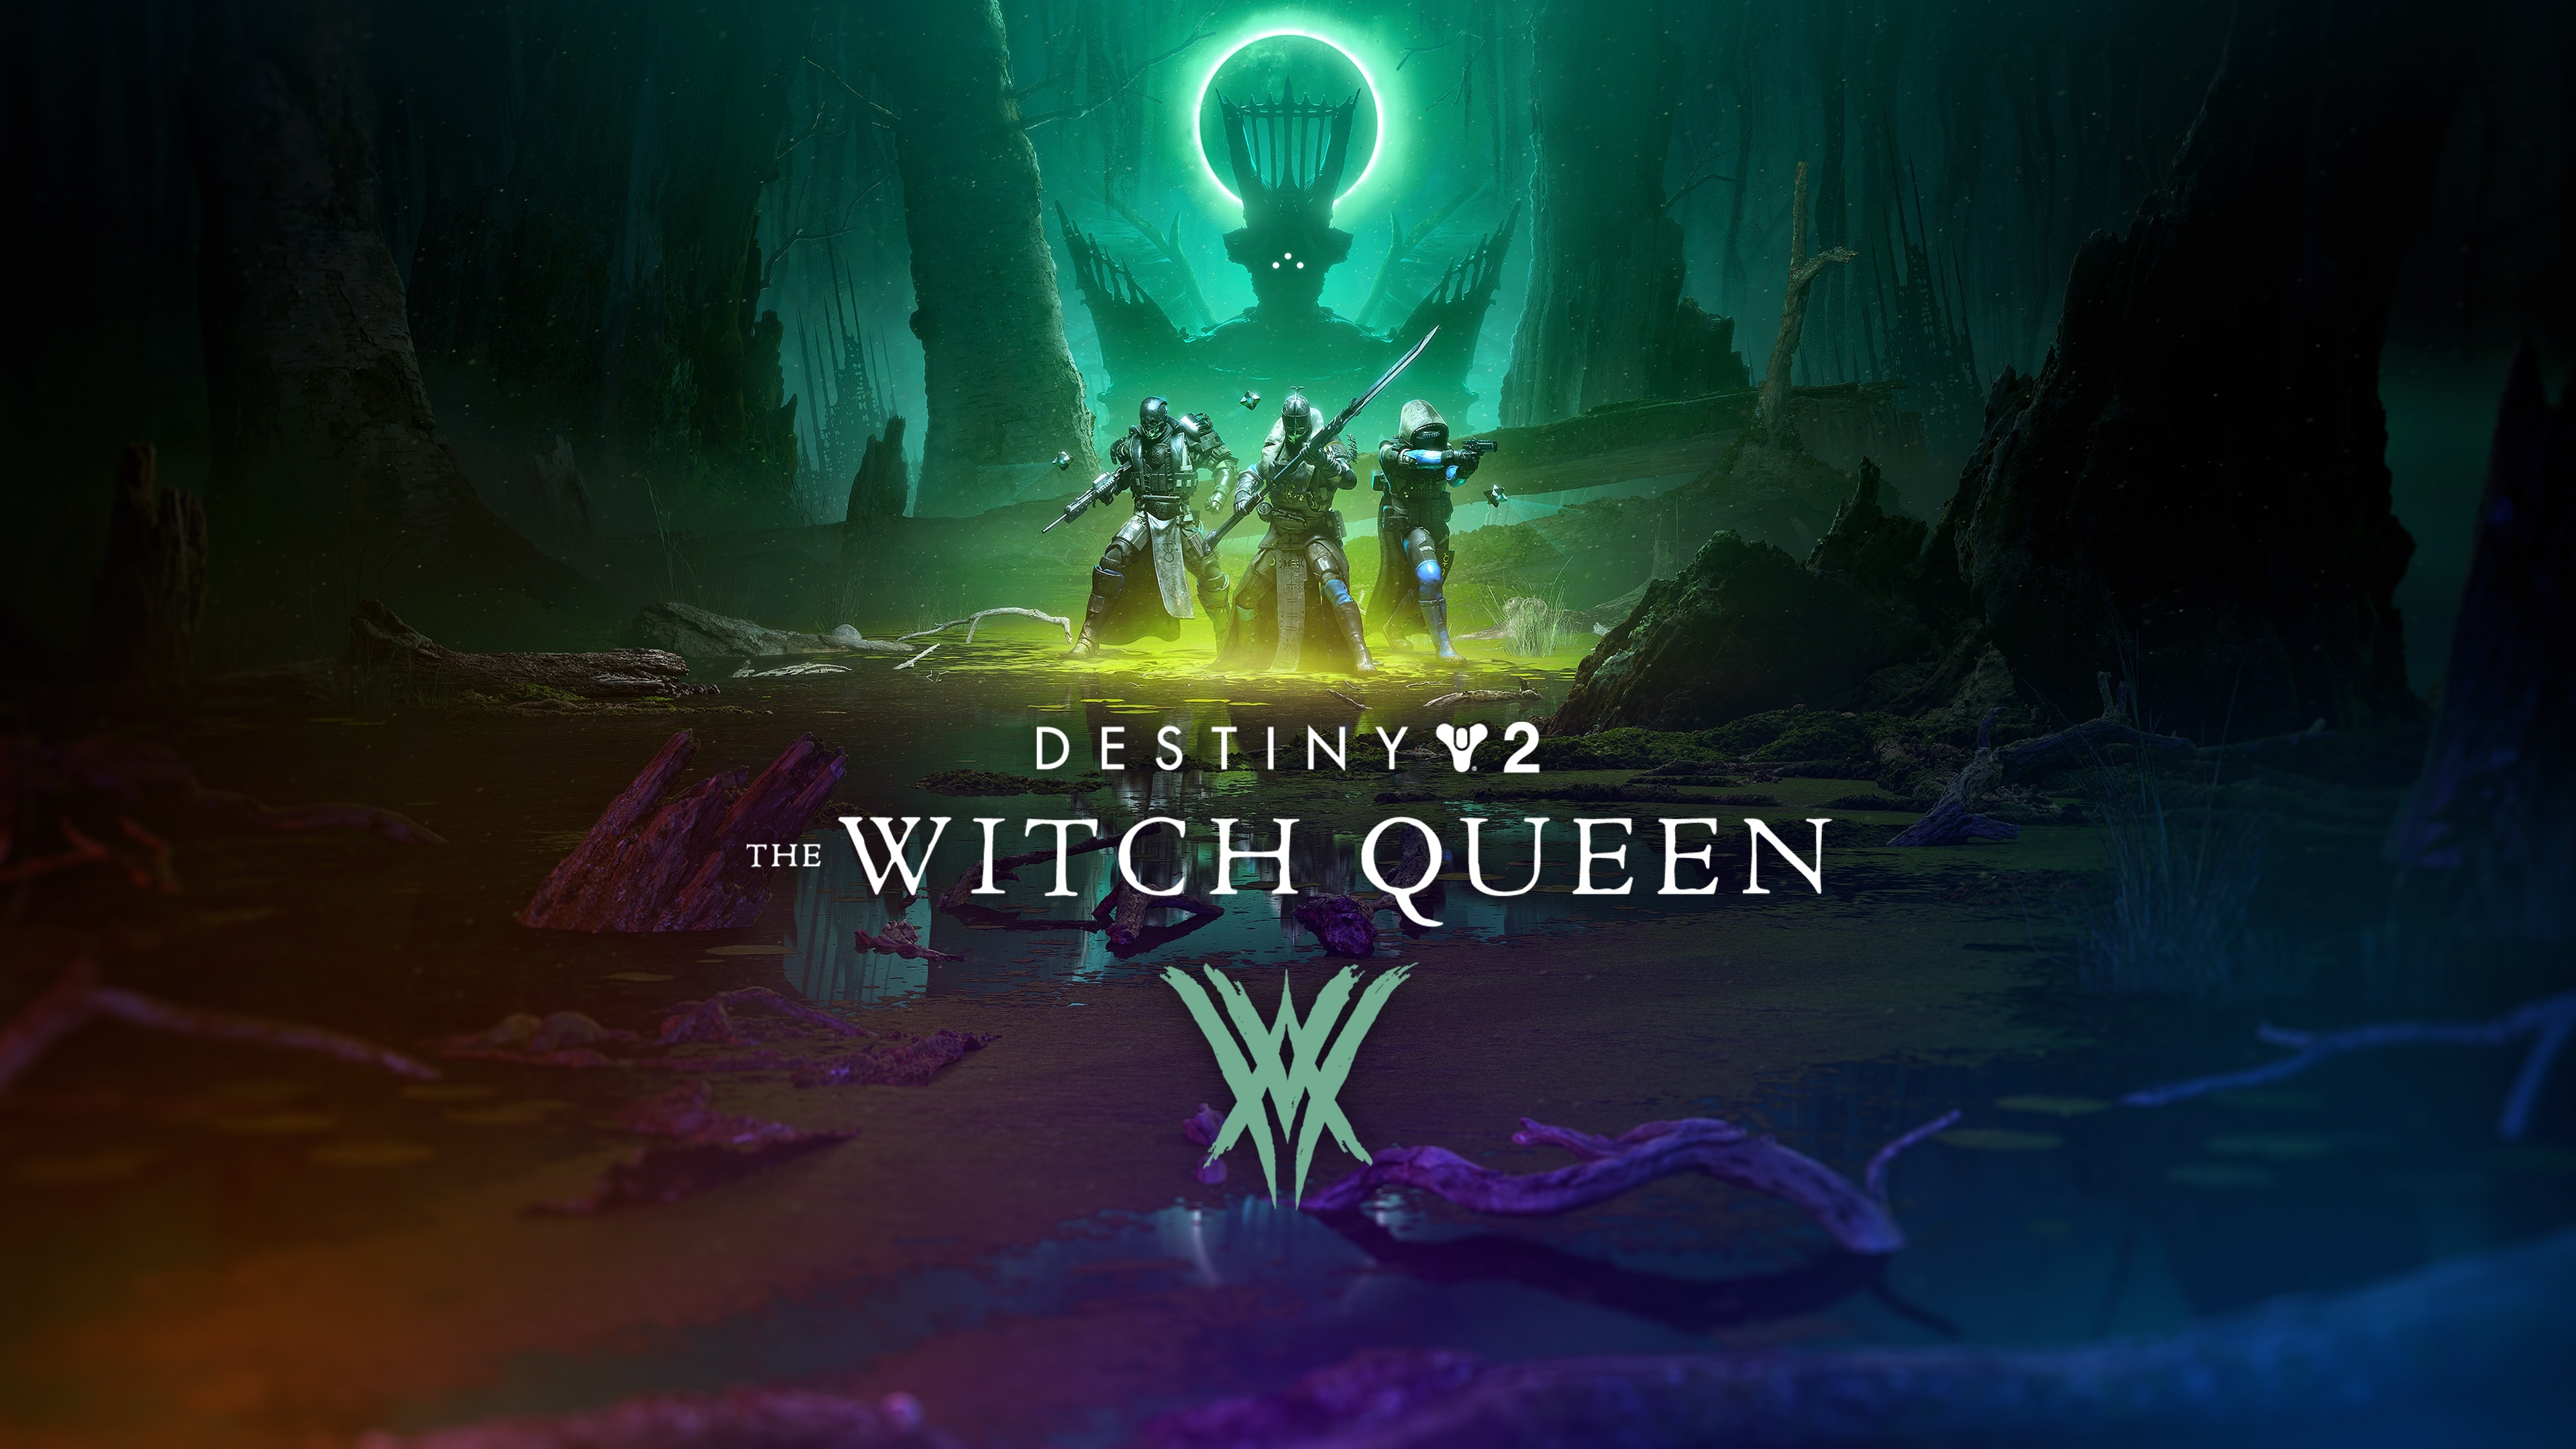 Destiny 2: The Witch Queen: Four planned seasons of content, To be released throughout Year 5. 3840x2160 4K Background.